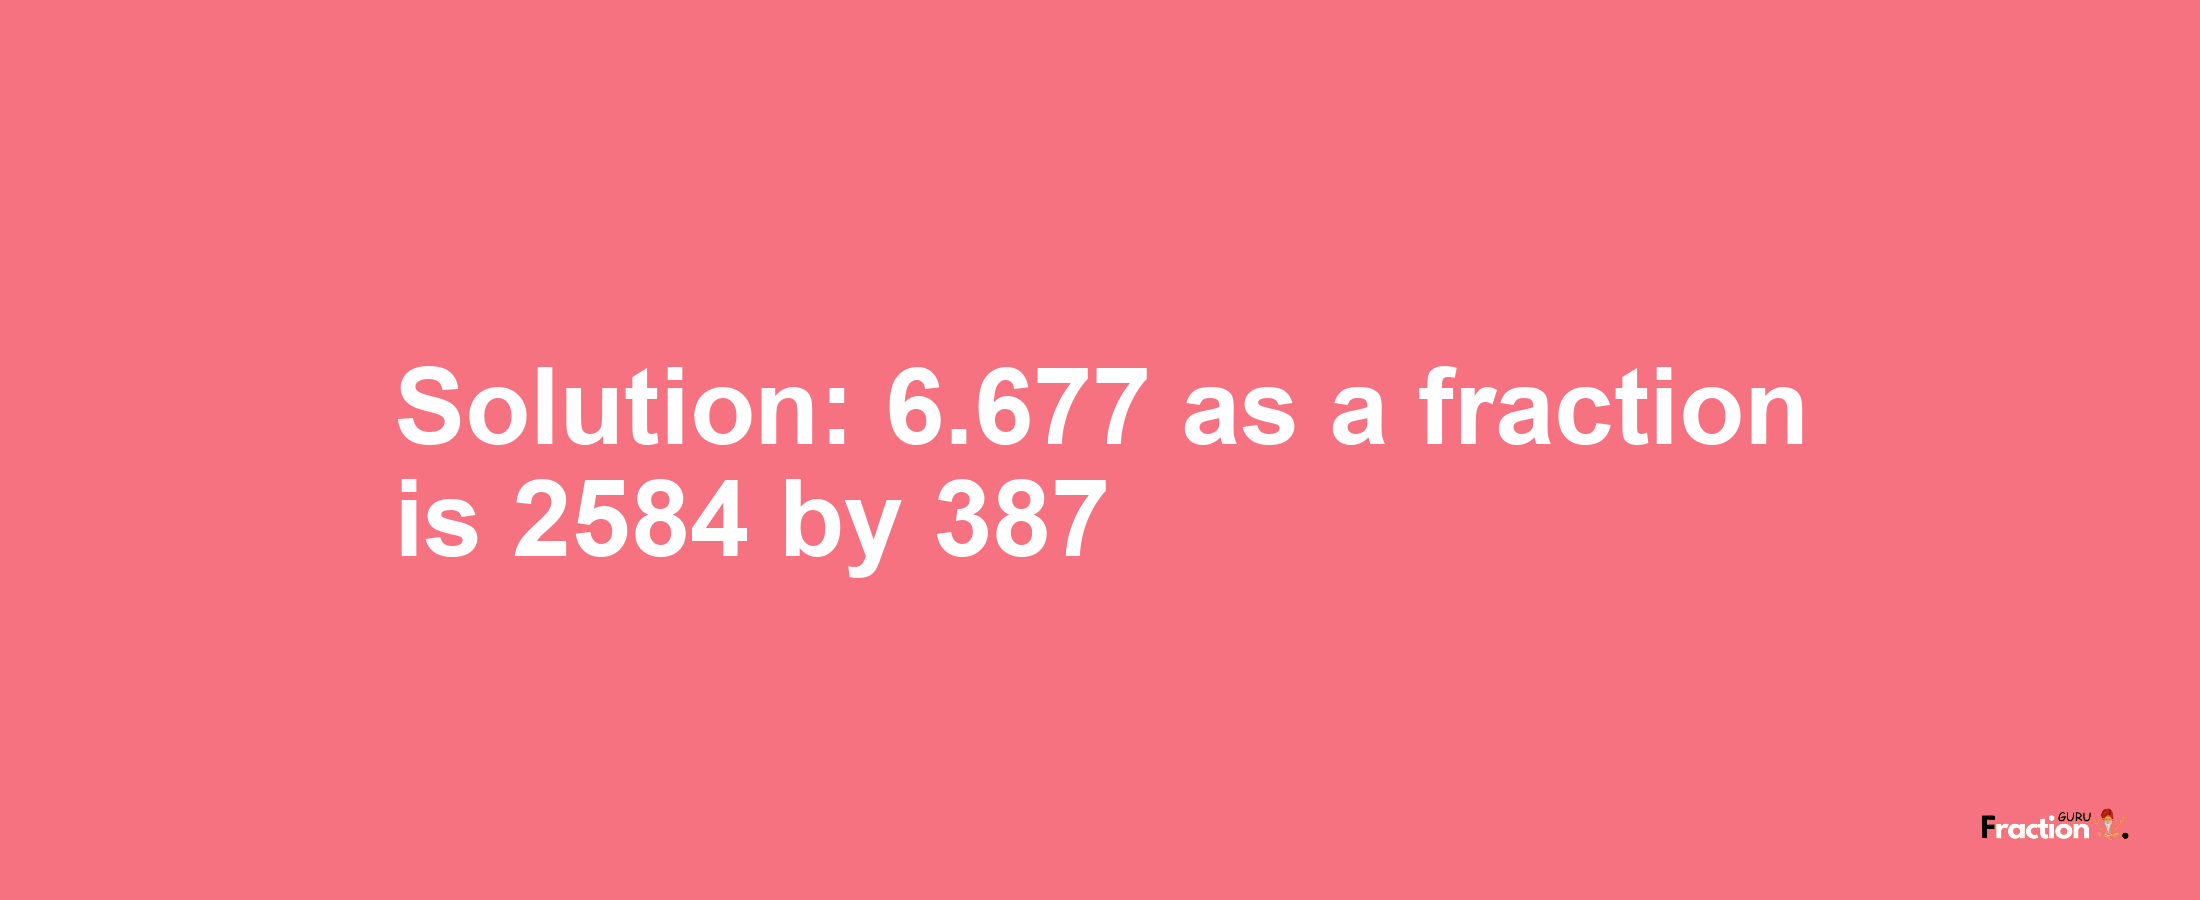 Solution:6.677 as a fraction is 2584/387